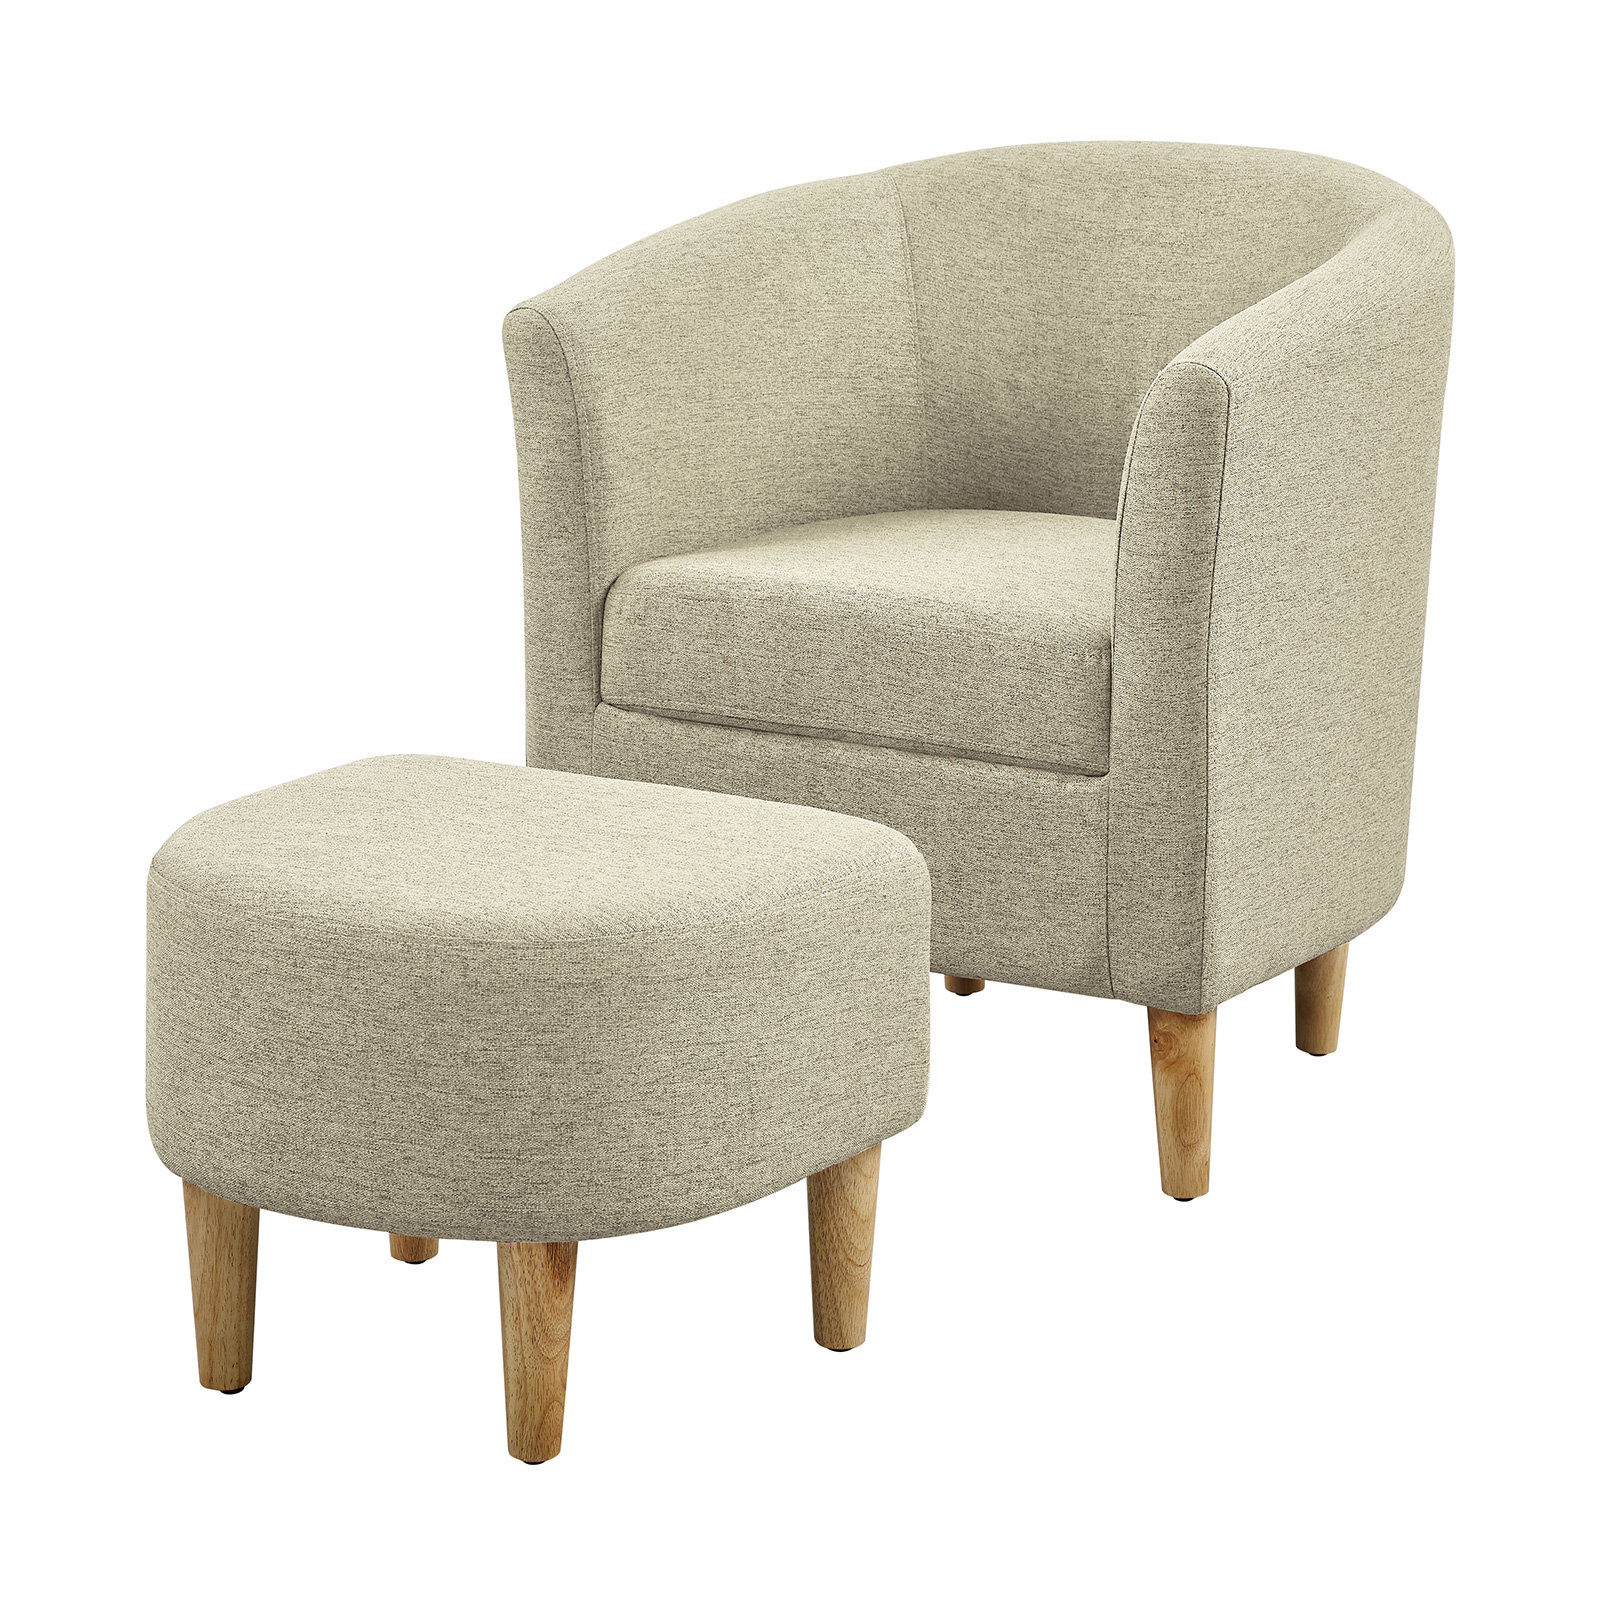 Hertford Upholstered Linen Blend Accent Chair with Wooden Legs and One Pillow Sand & Stable Fabric: Beige Linen Blend